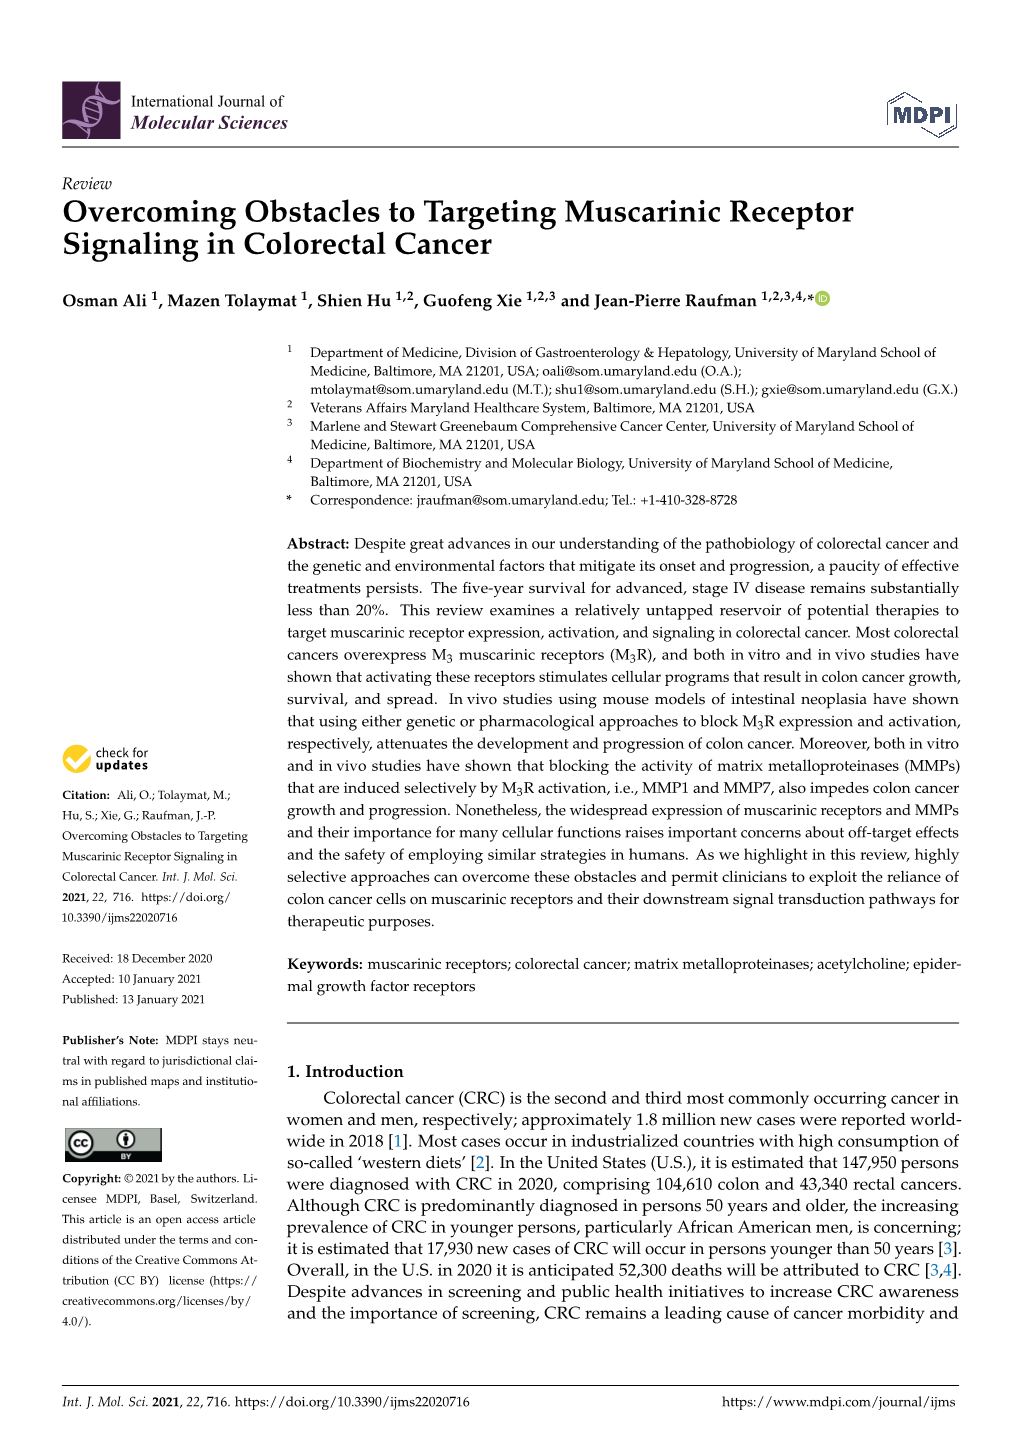 Overcoming Obstacles to Targeting Muscarinic Receptor Signaling in Colorectal Cancer